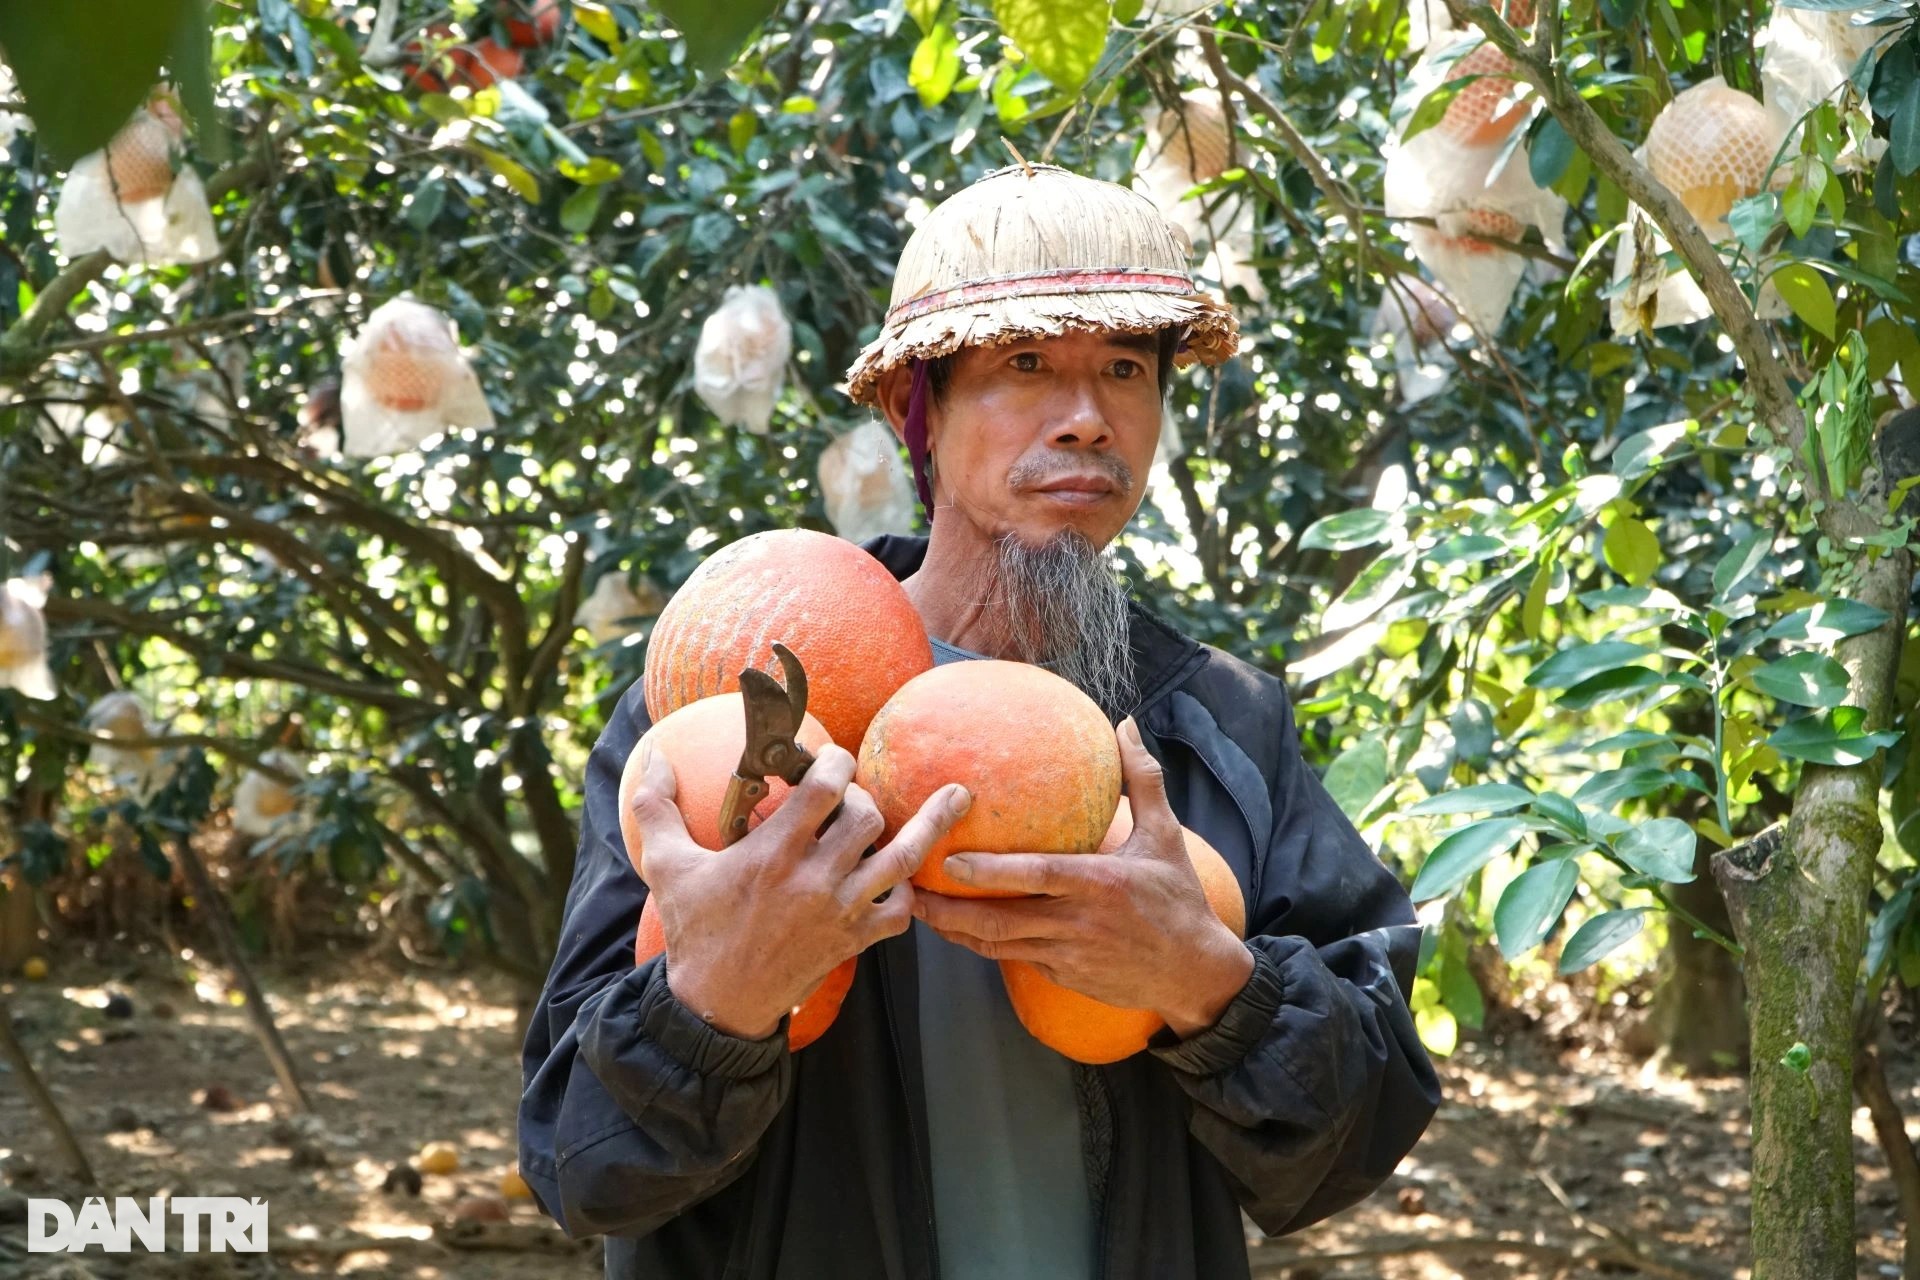 The old farmer earns half a billion dong in the Tet season thanks to the ripe red fruit from the inside out - 8